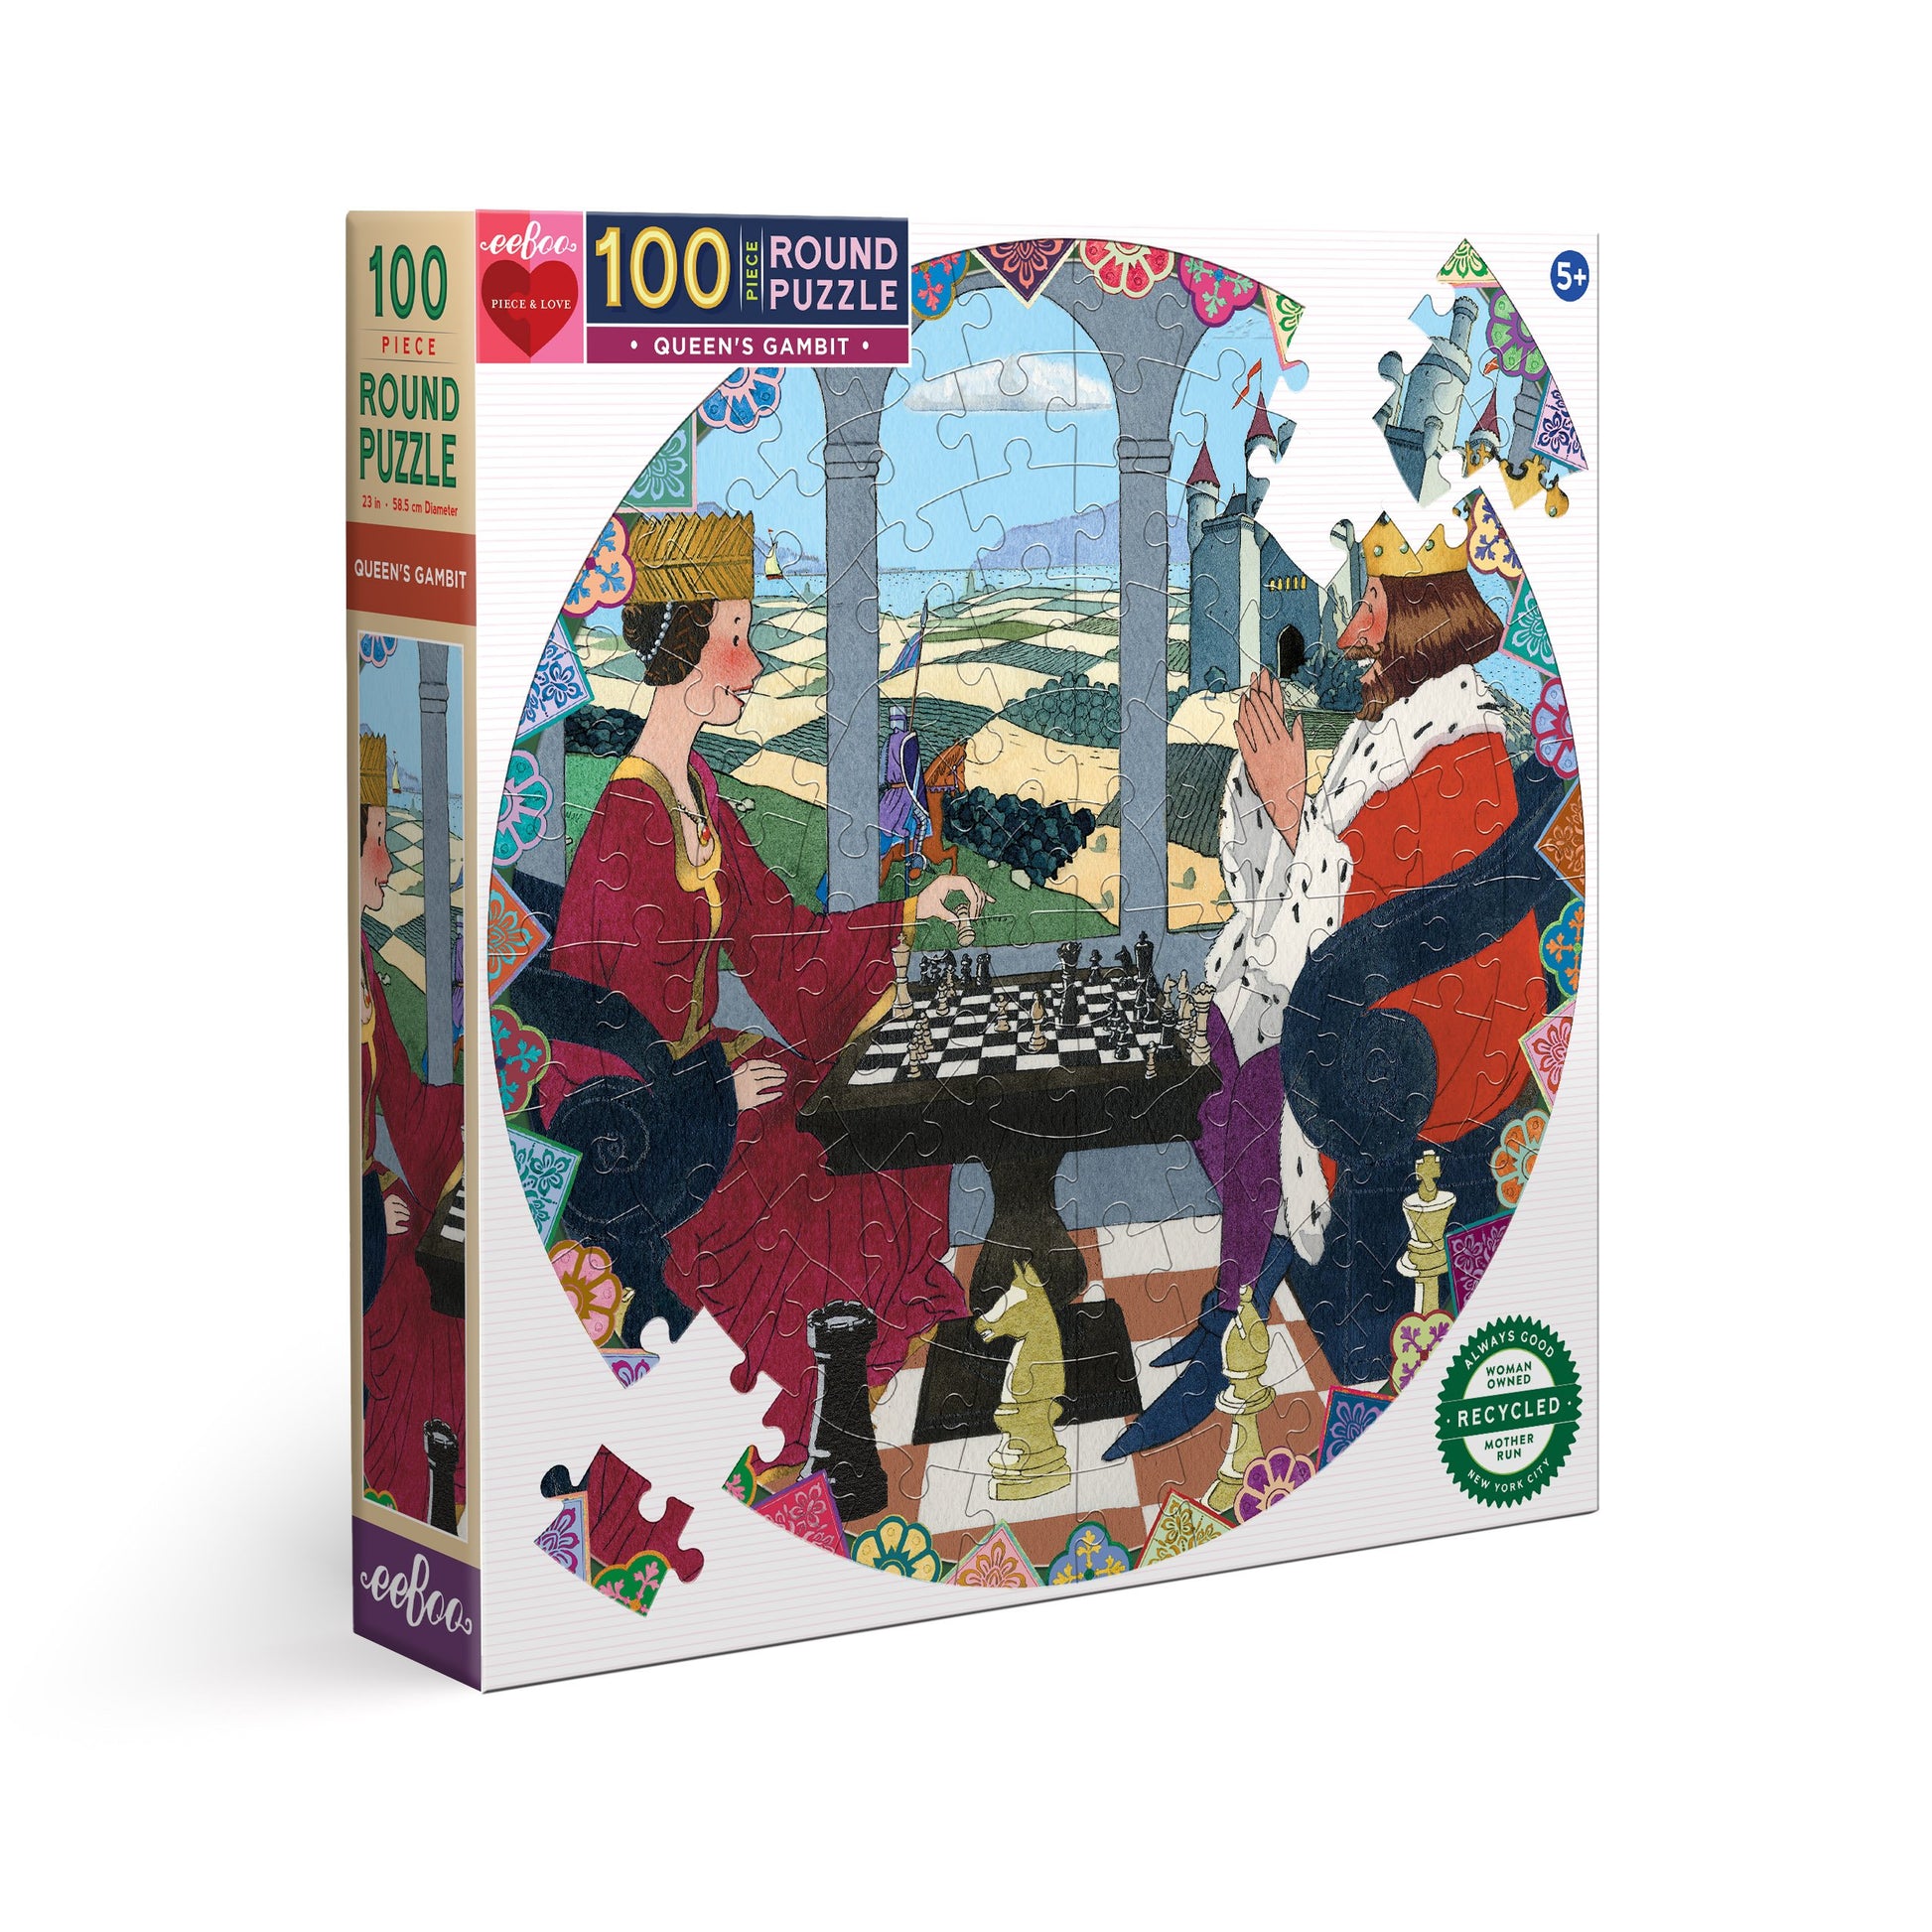 eeBoo 100pc Puzzle Queens Gambit Round The Toy Wagon 